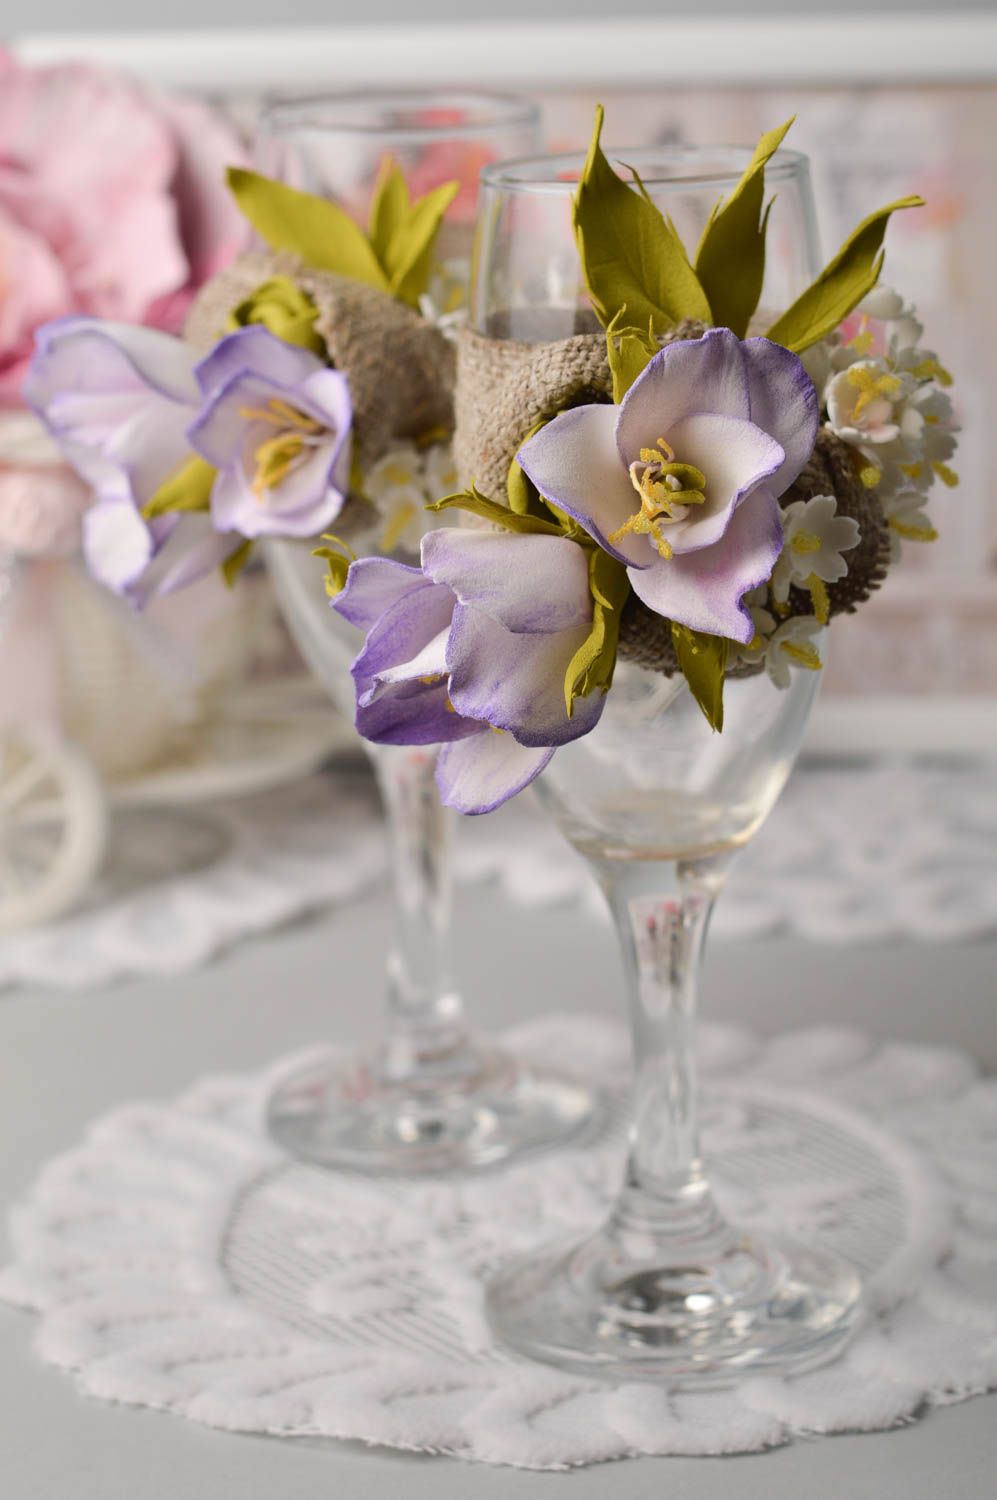 Handmade wedding glasses with flowers unusual glasses for newlyweds gift ideas photo 1